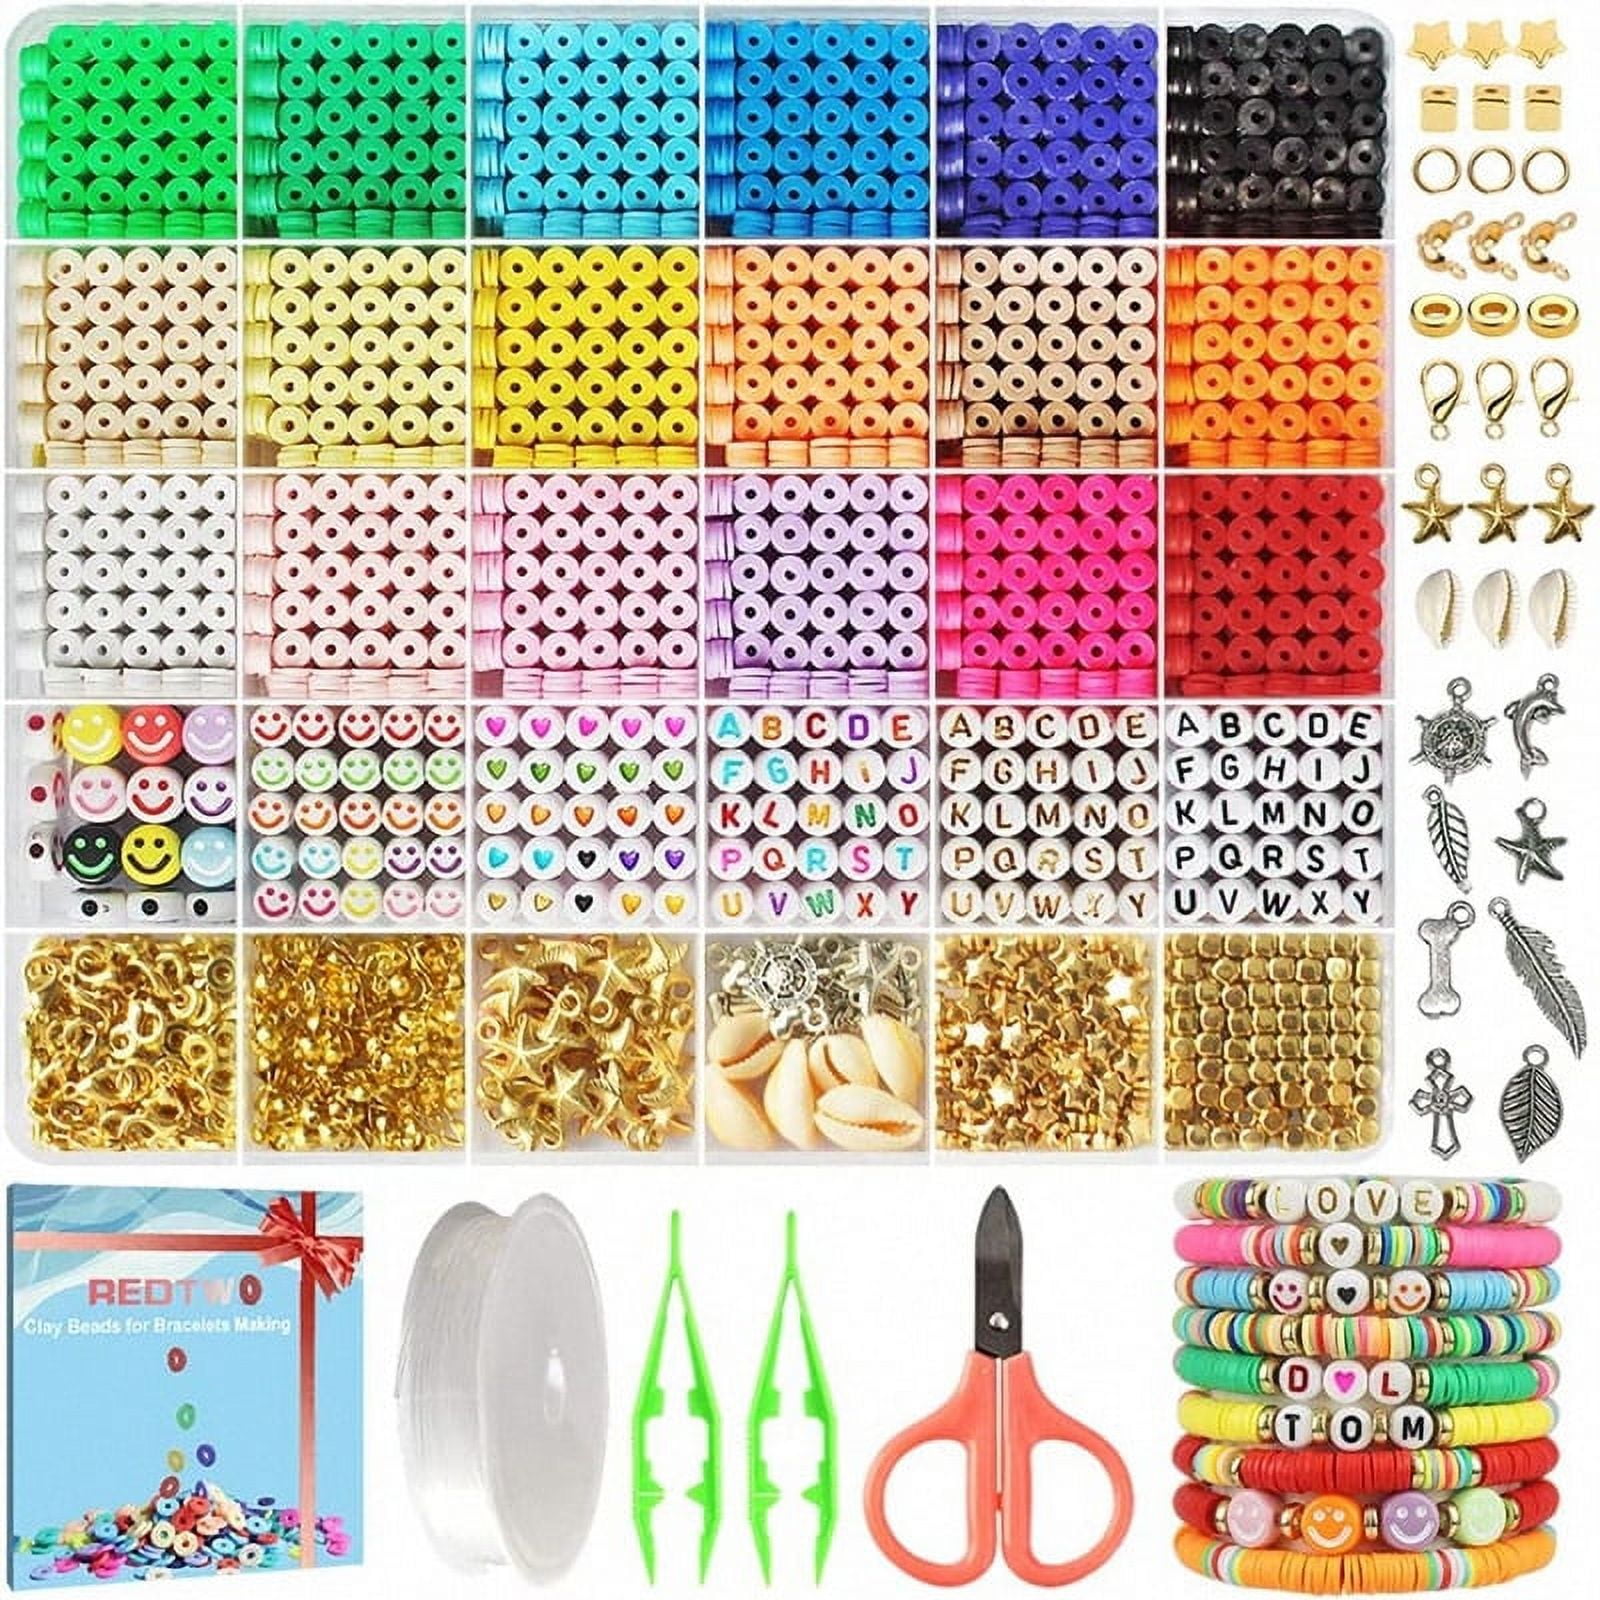 Clay Beads Kit for Bracelets Making: Loxdn 18 Color Flat Beads for Jewelry Makin